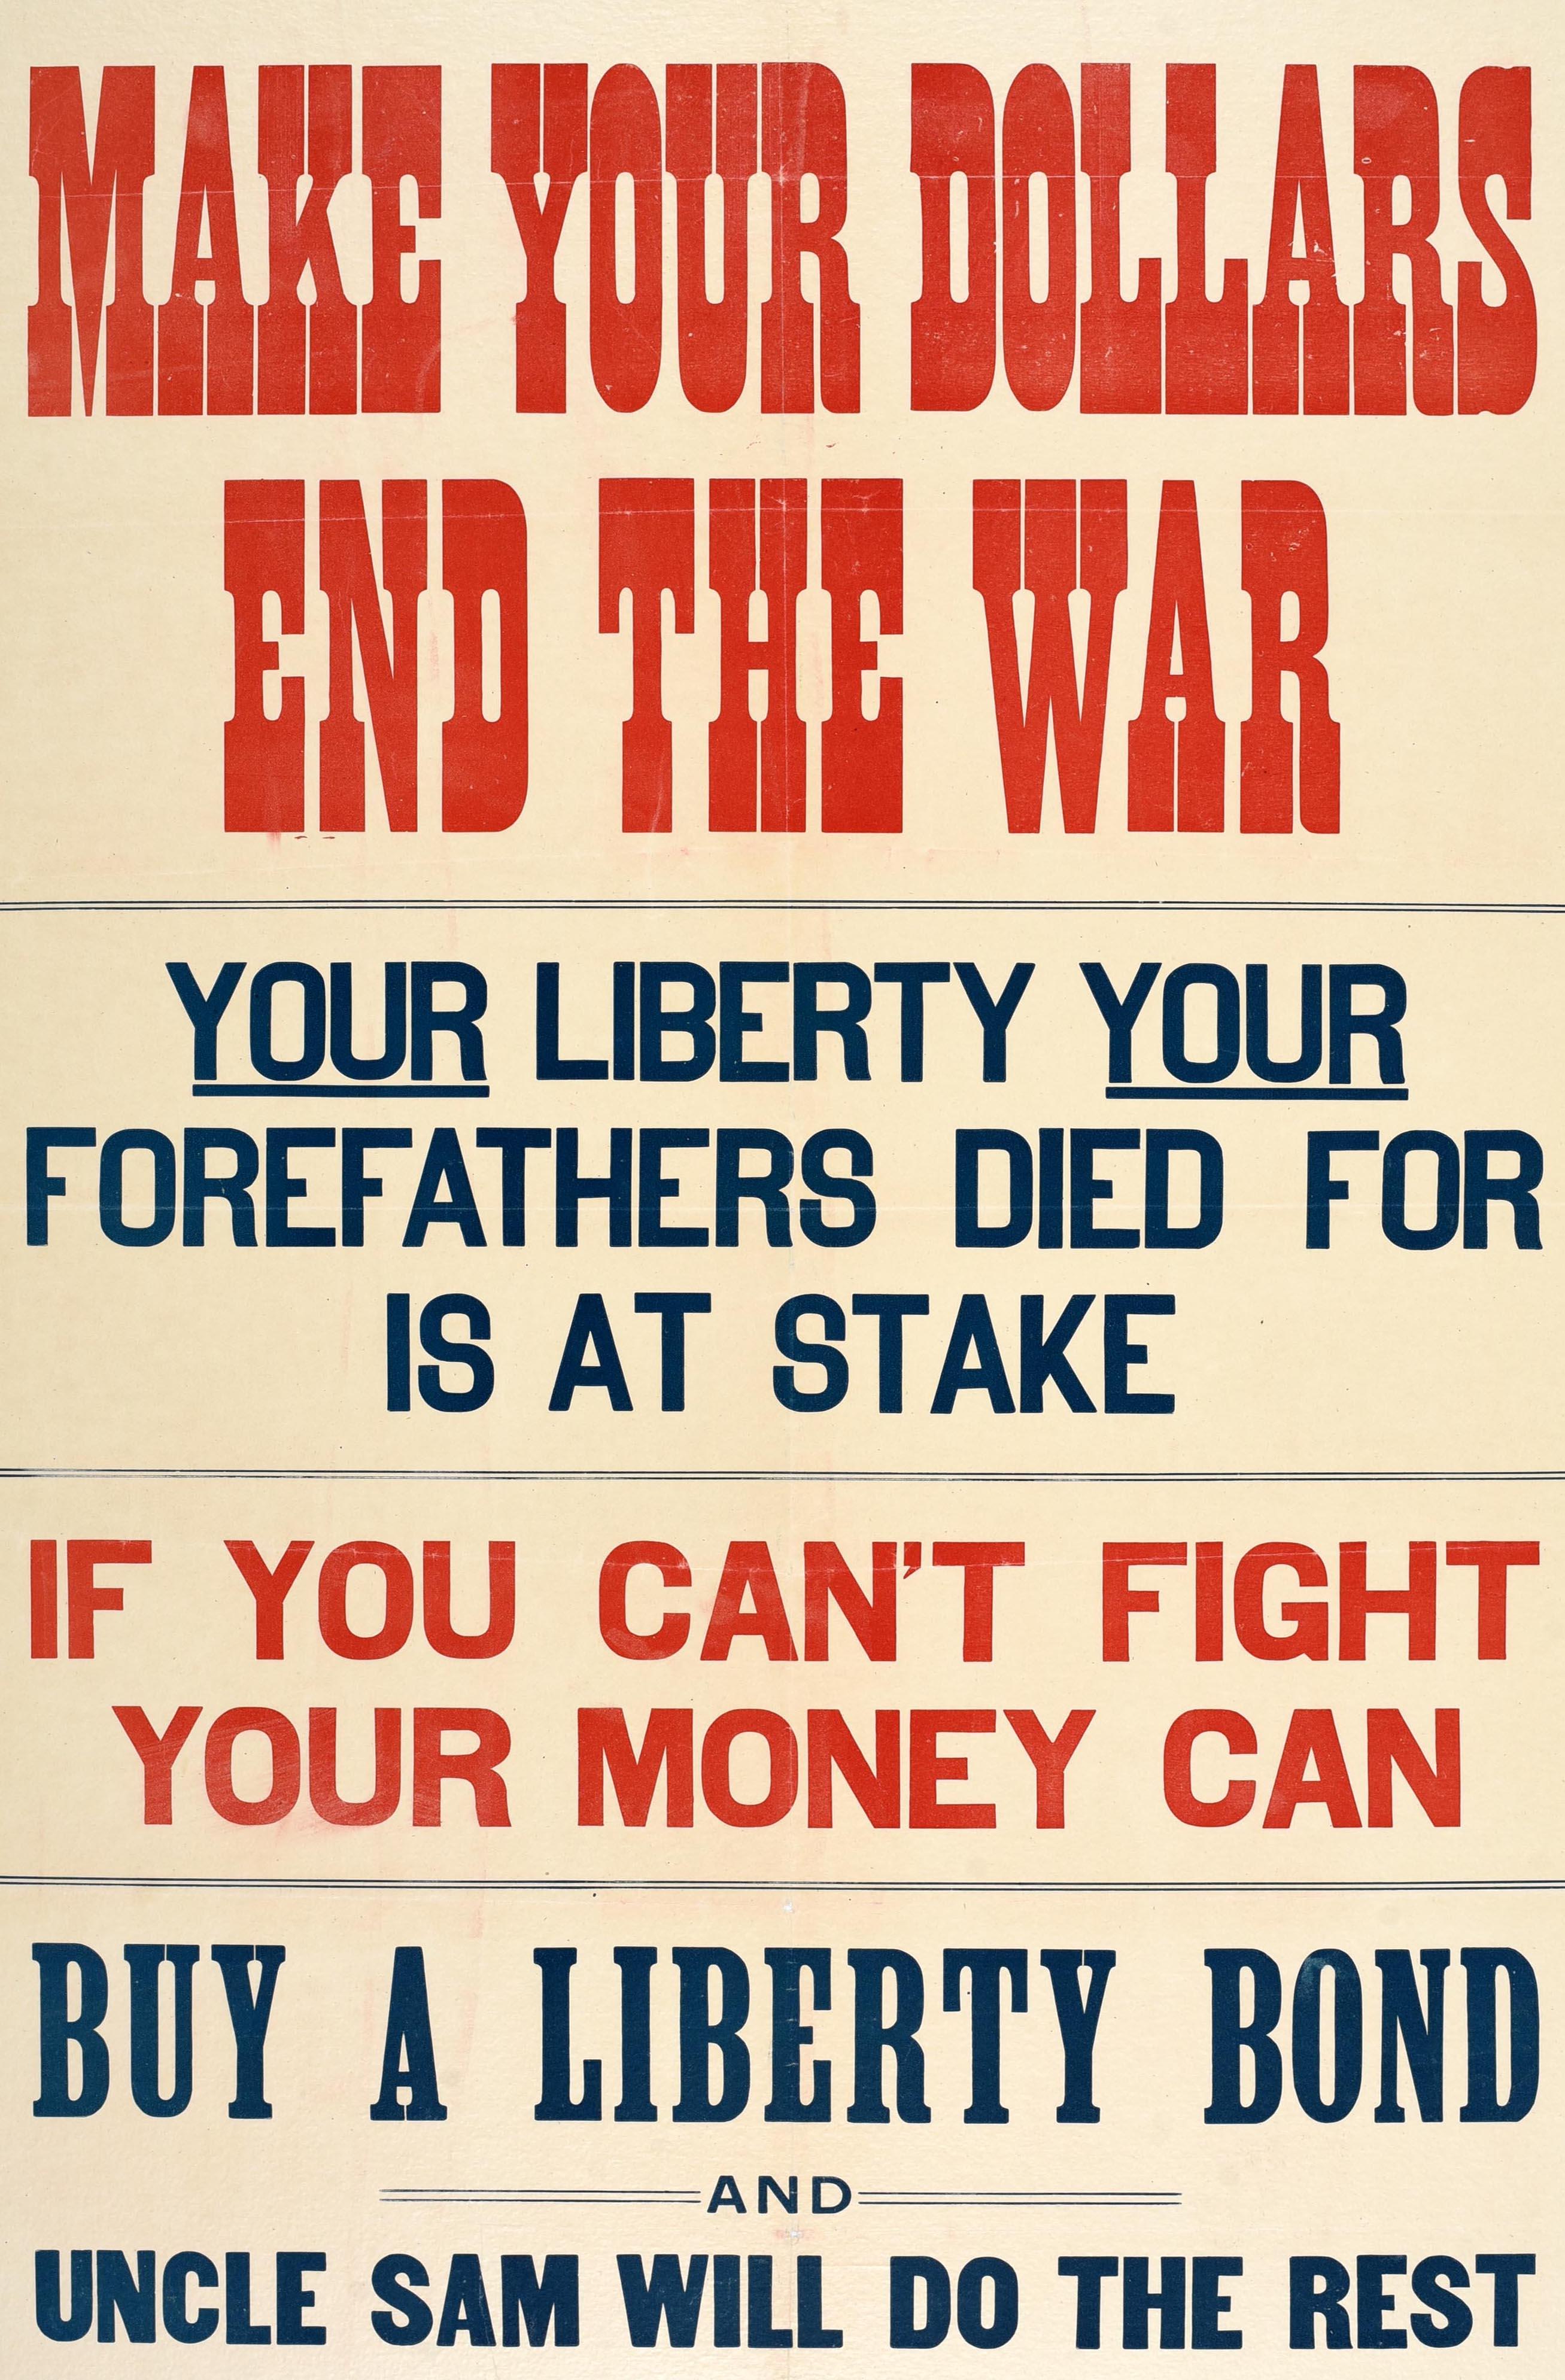 Originales antikes Kriegsanleihe-Poster aus dem Ersten Weltkrieg mit fetten roten und blauen Buchstaben - Make your dollars end the war Your liberty your forefathers died for is at stake If you can't fight your money can Buy a liberty bond and Uncle